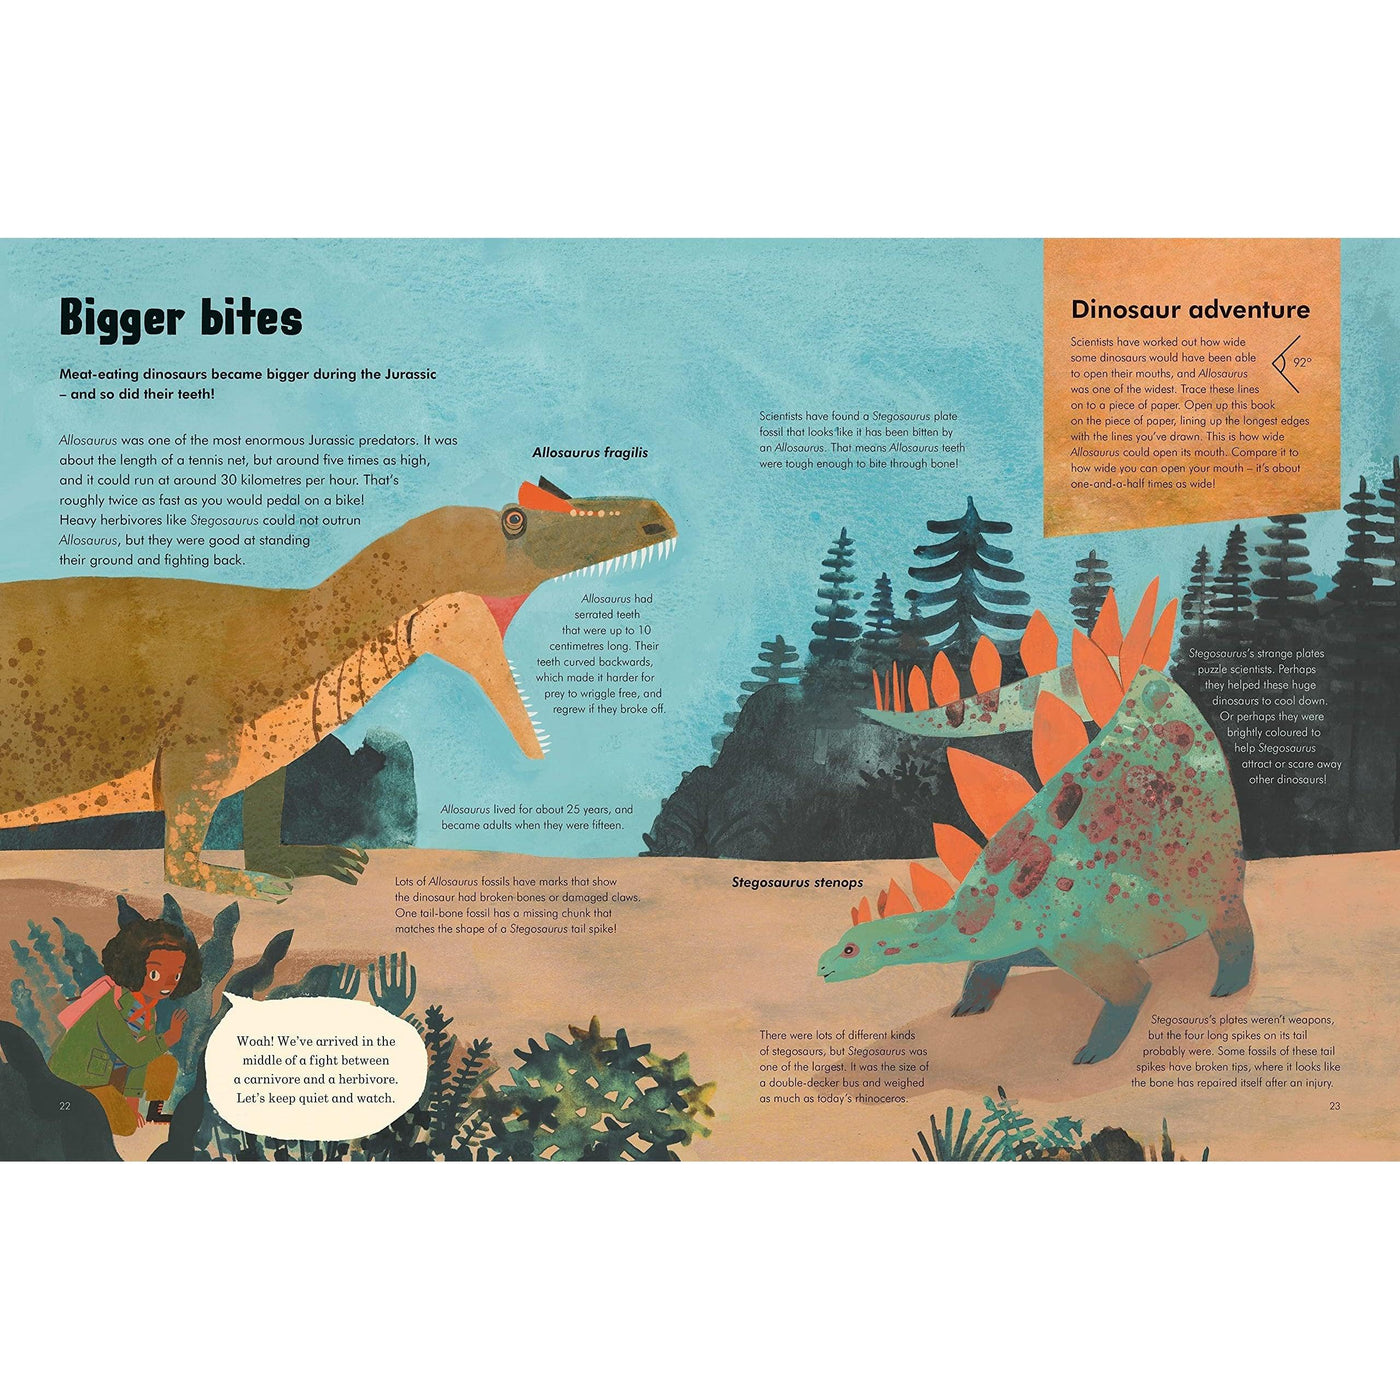 An Adventurer's Guide to Dinosaurs